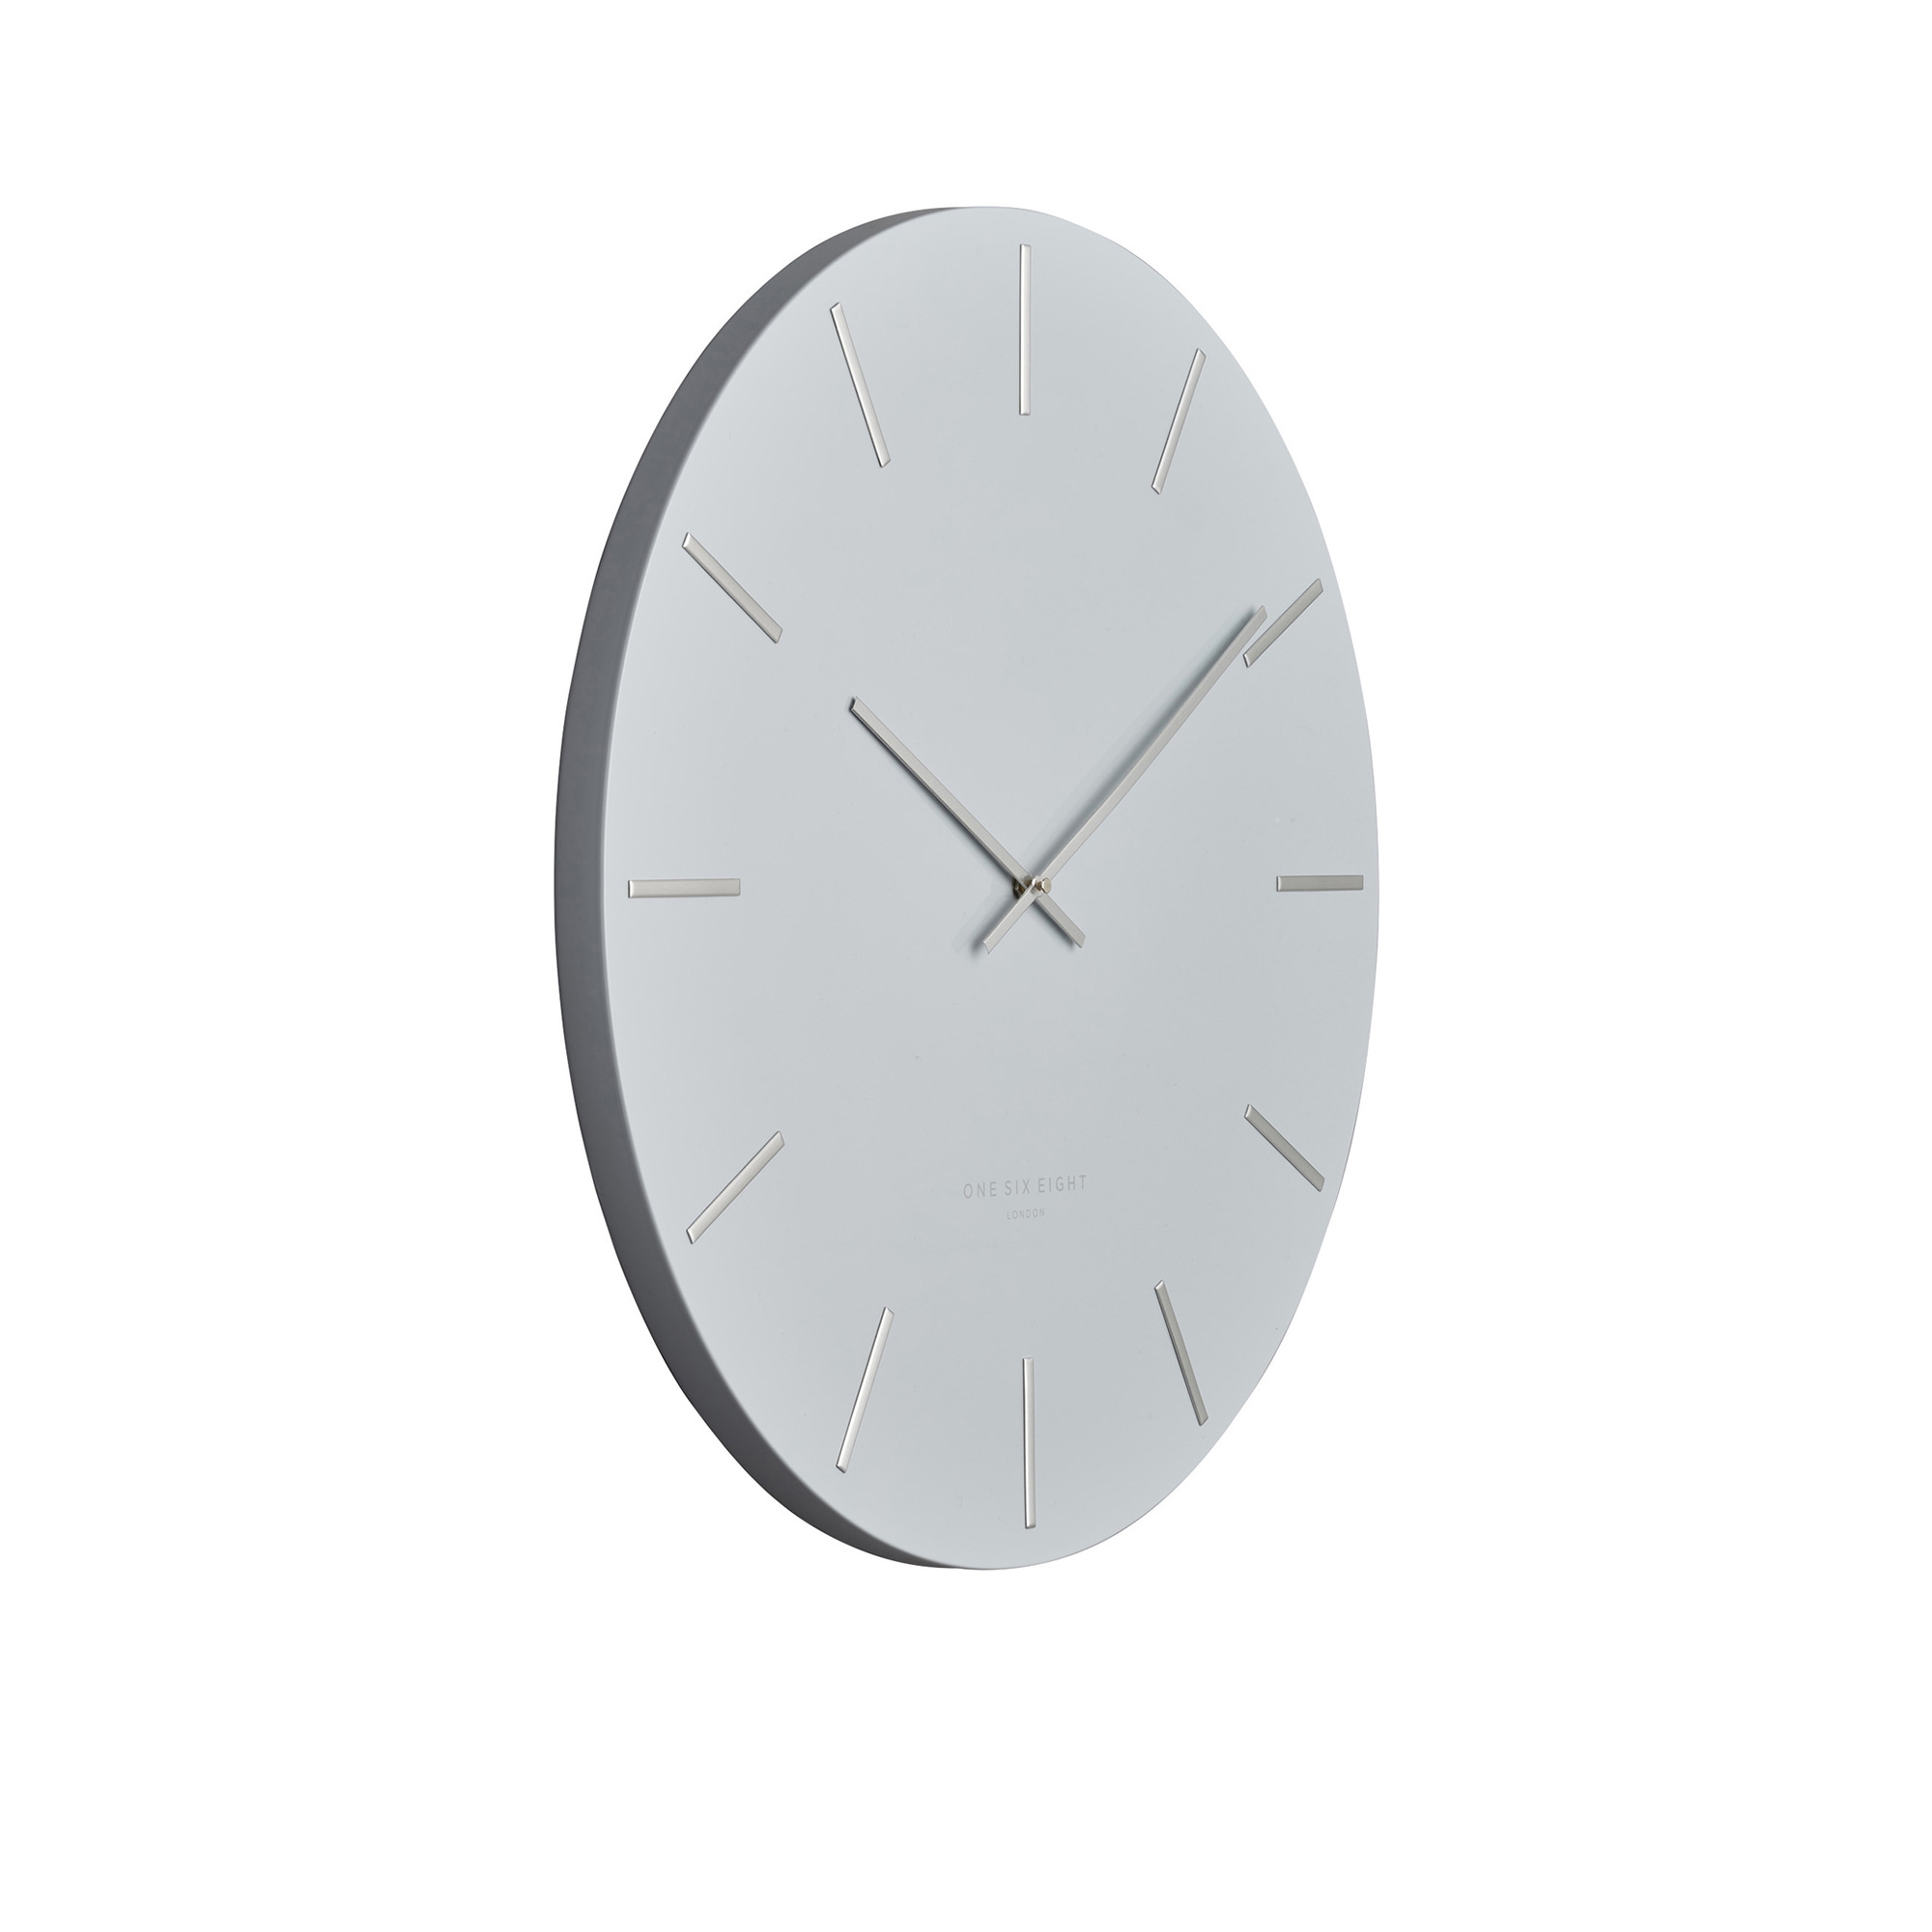 One Six Eight London Luca Silent Wall Clock 40cm Cool Grey Image 2